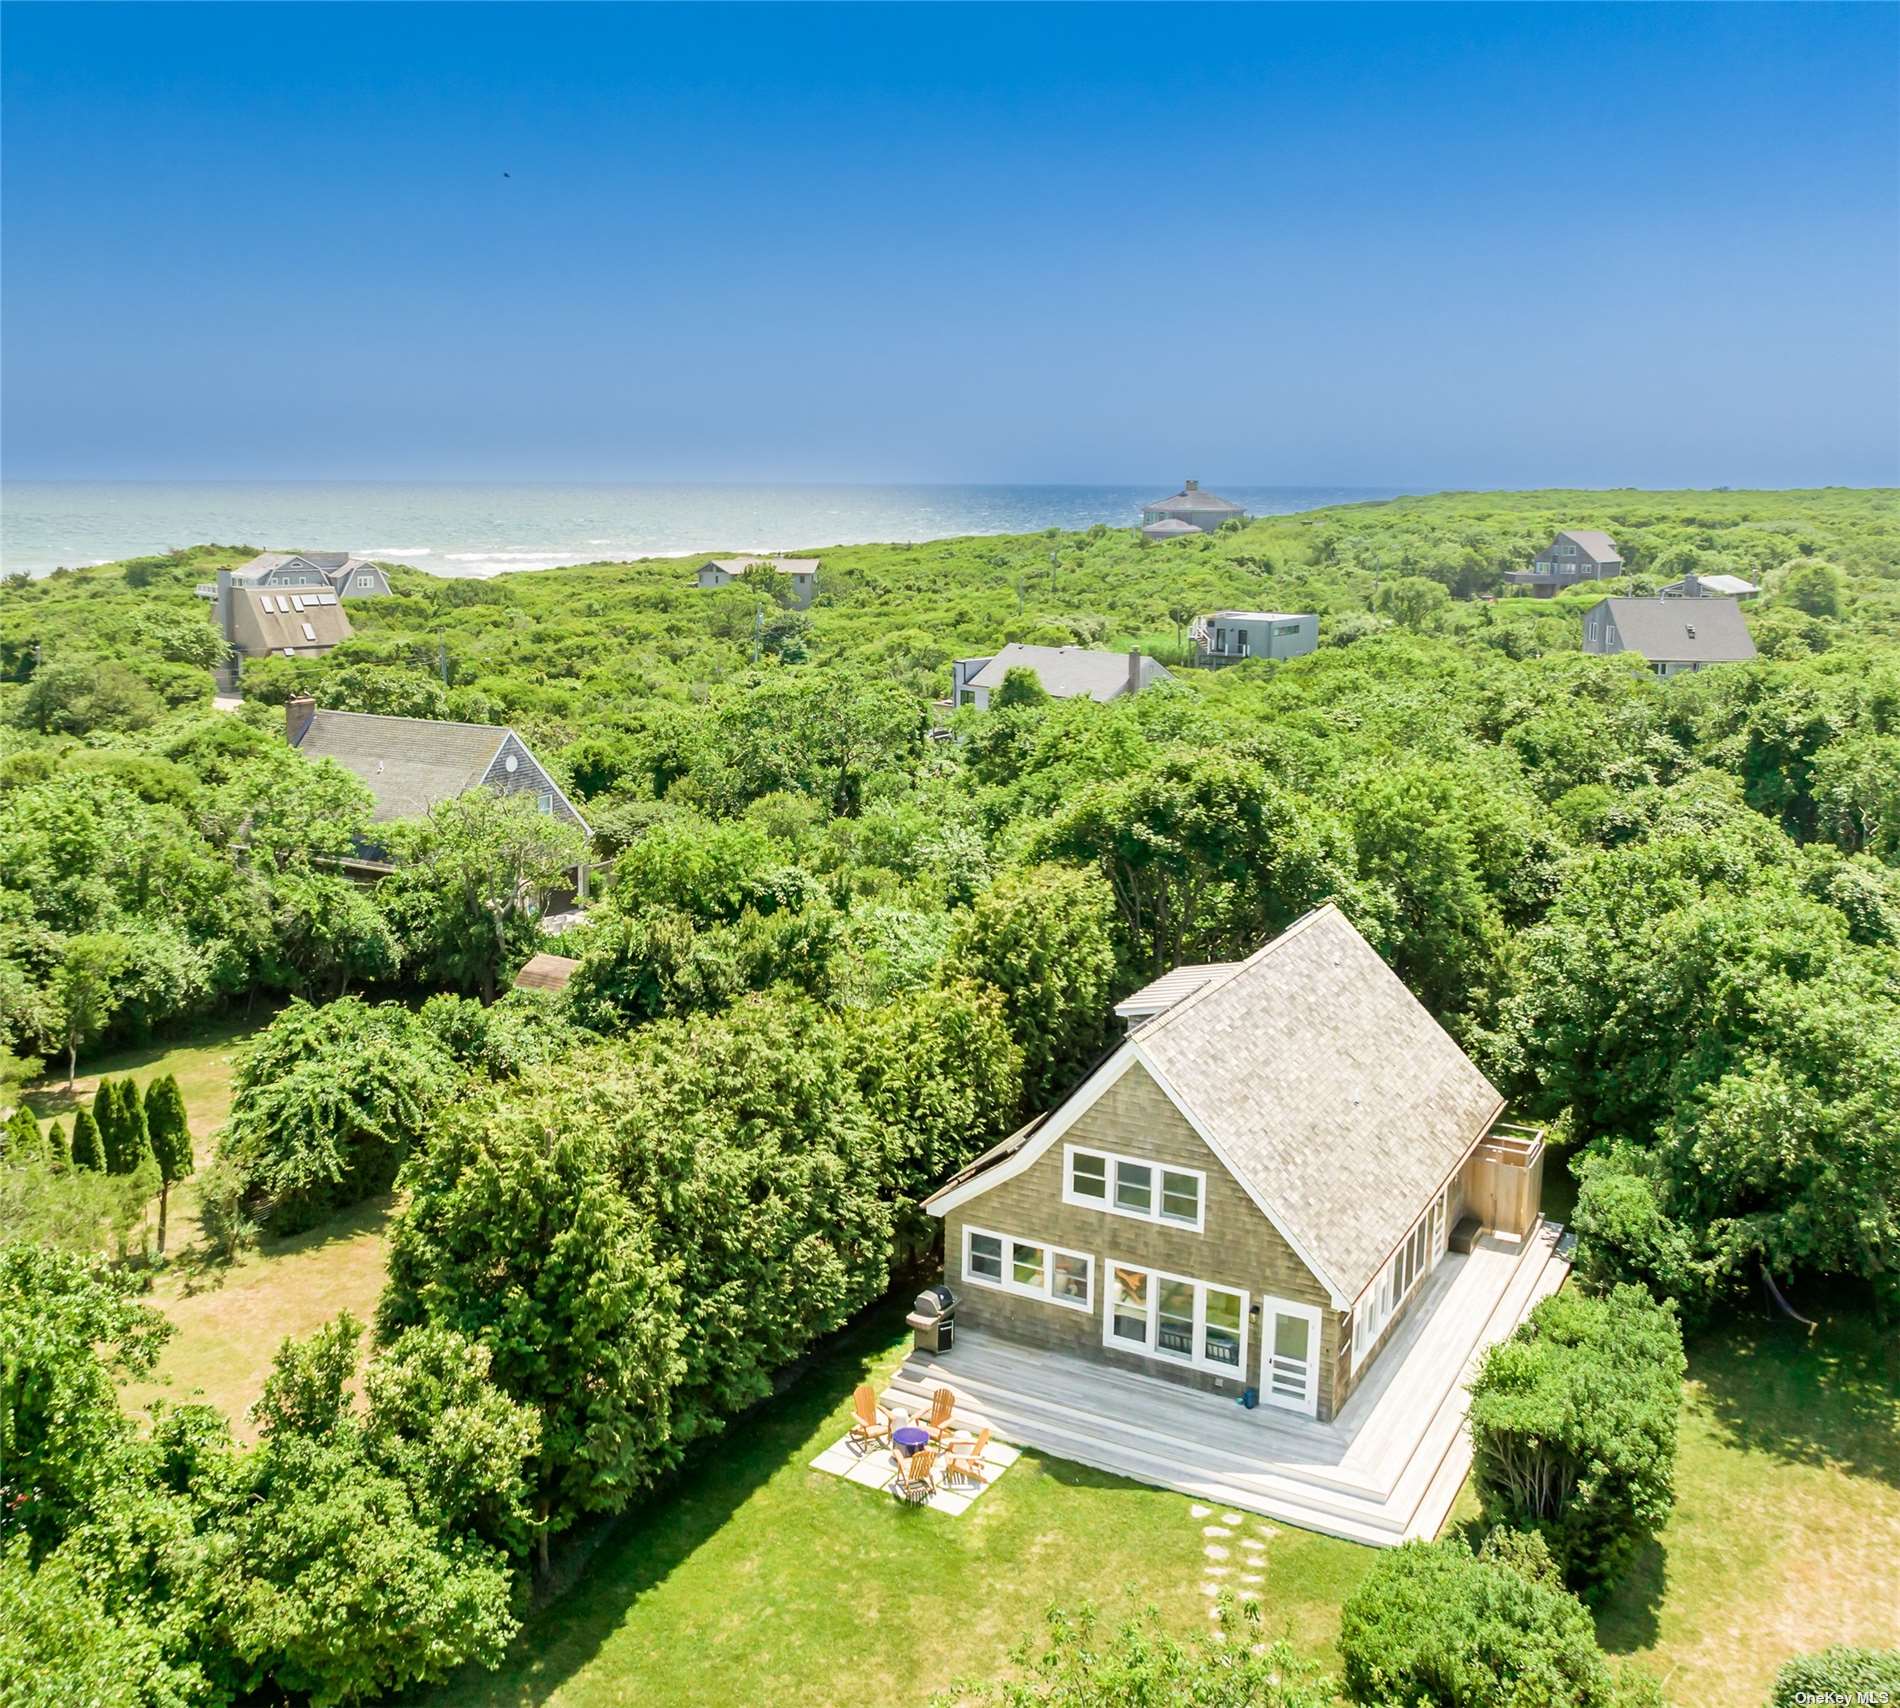 Property for Sale at 40 Ditch Plains Road, Montauk, Hamptons, NY - Bedrooms: 3 
Bathrooms: 3  - $2,795,000